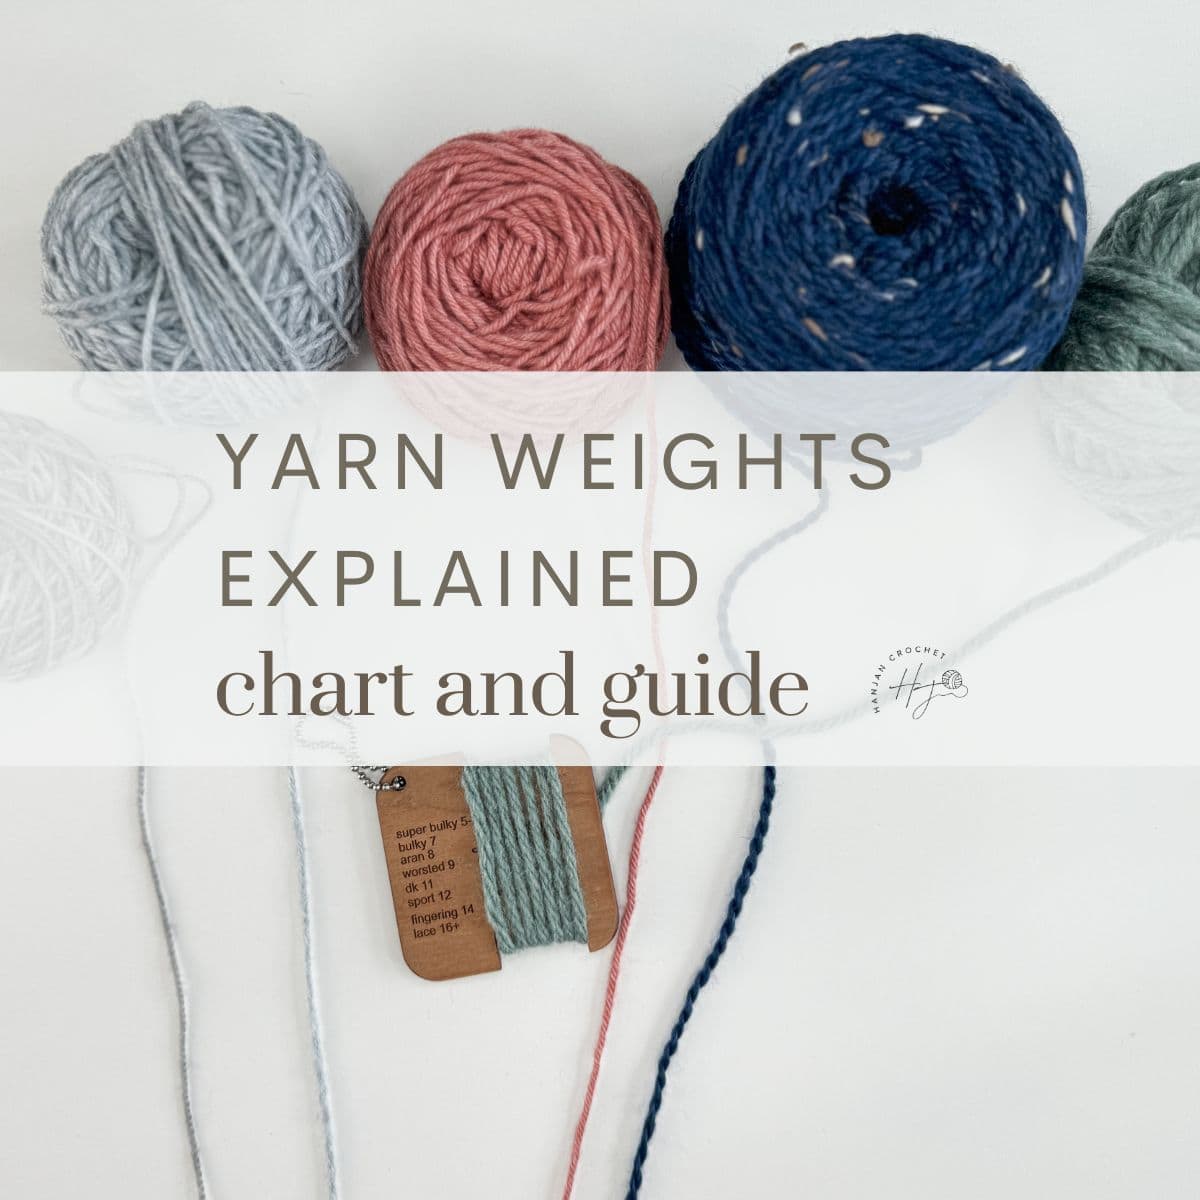 Yarn Weight Chart and Guide in Crochet